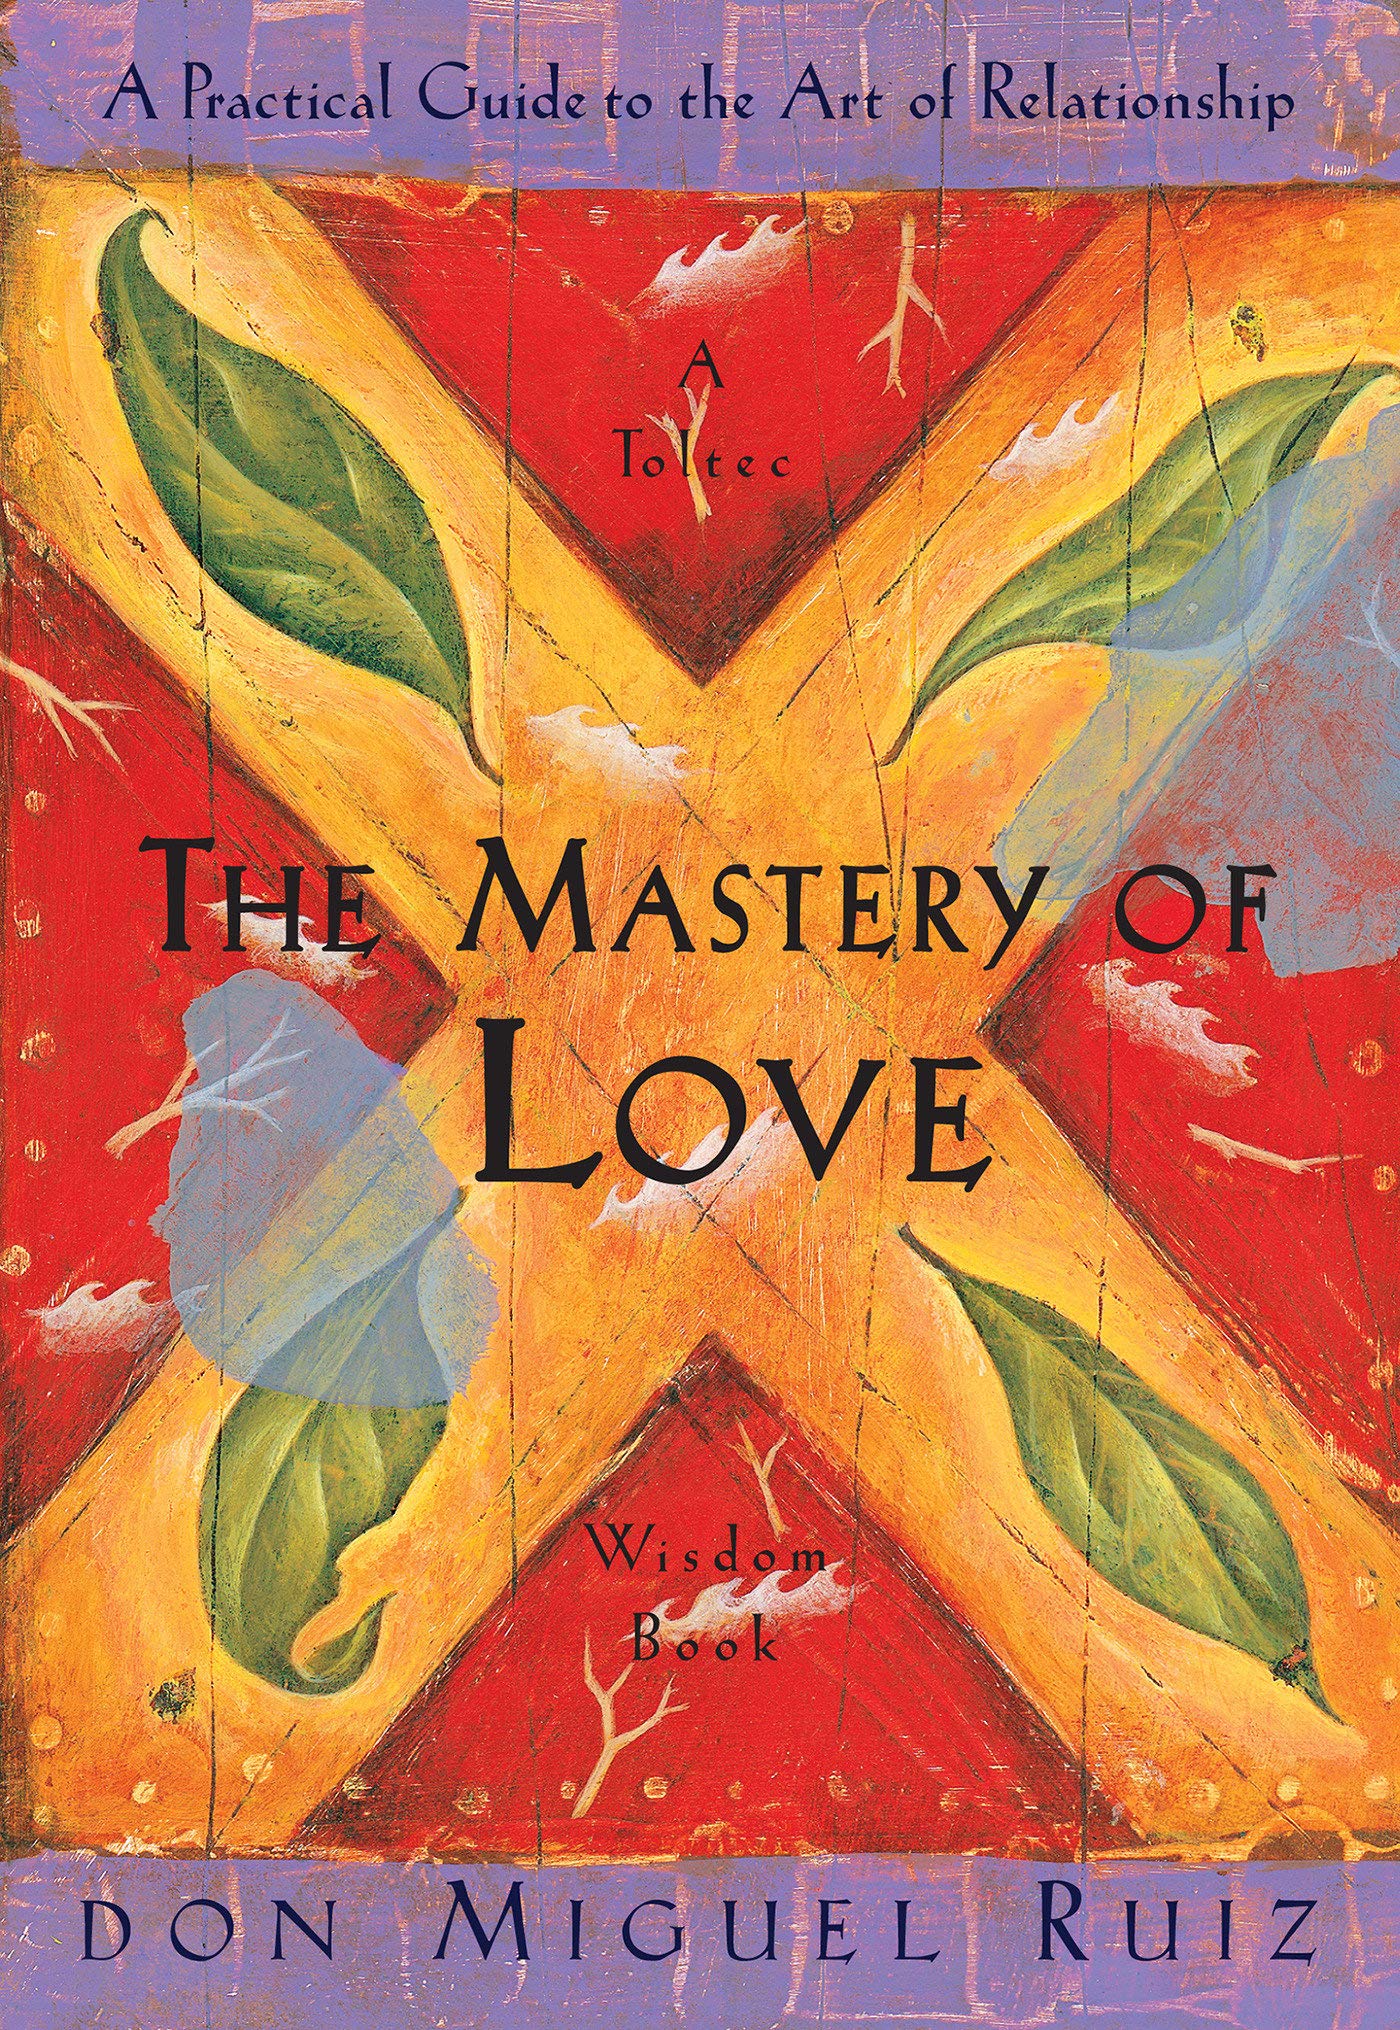 The Mastery Of Love by Don Miguel Ruiz